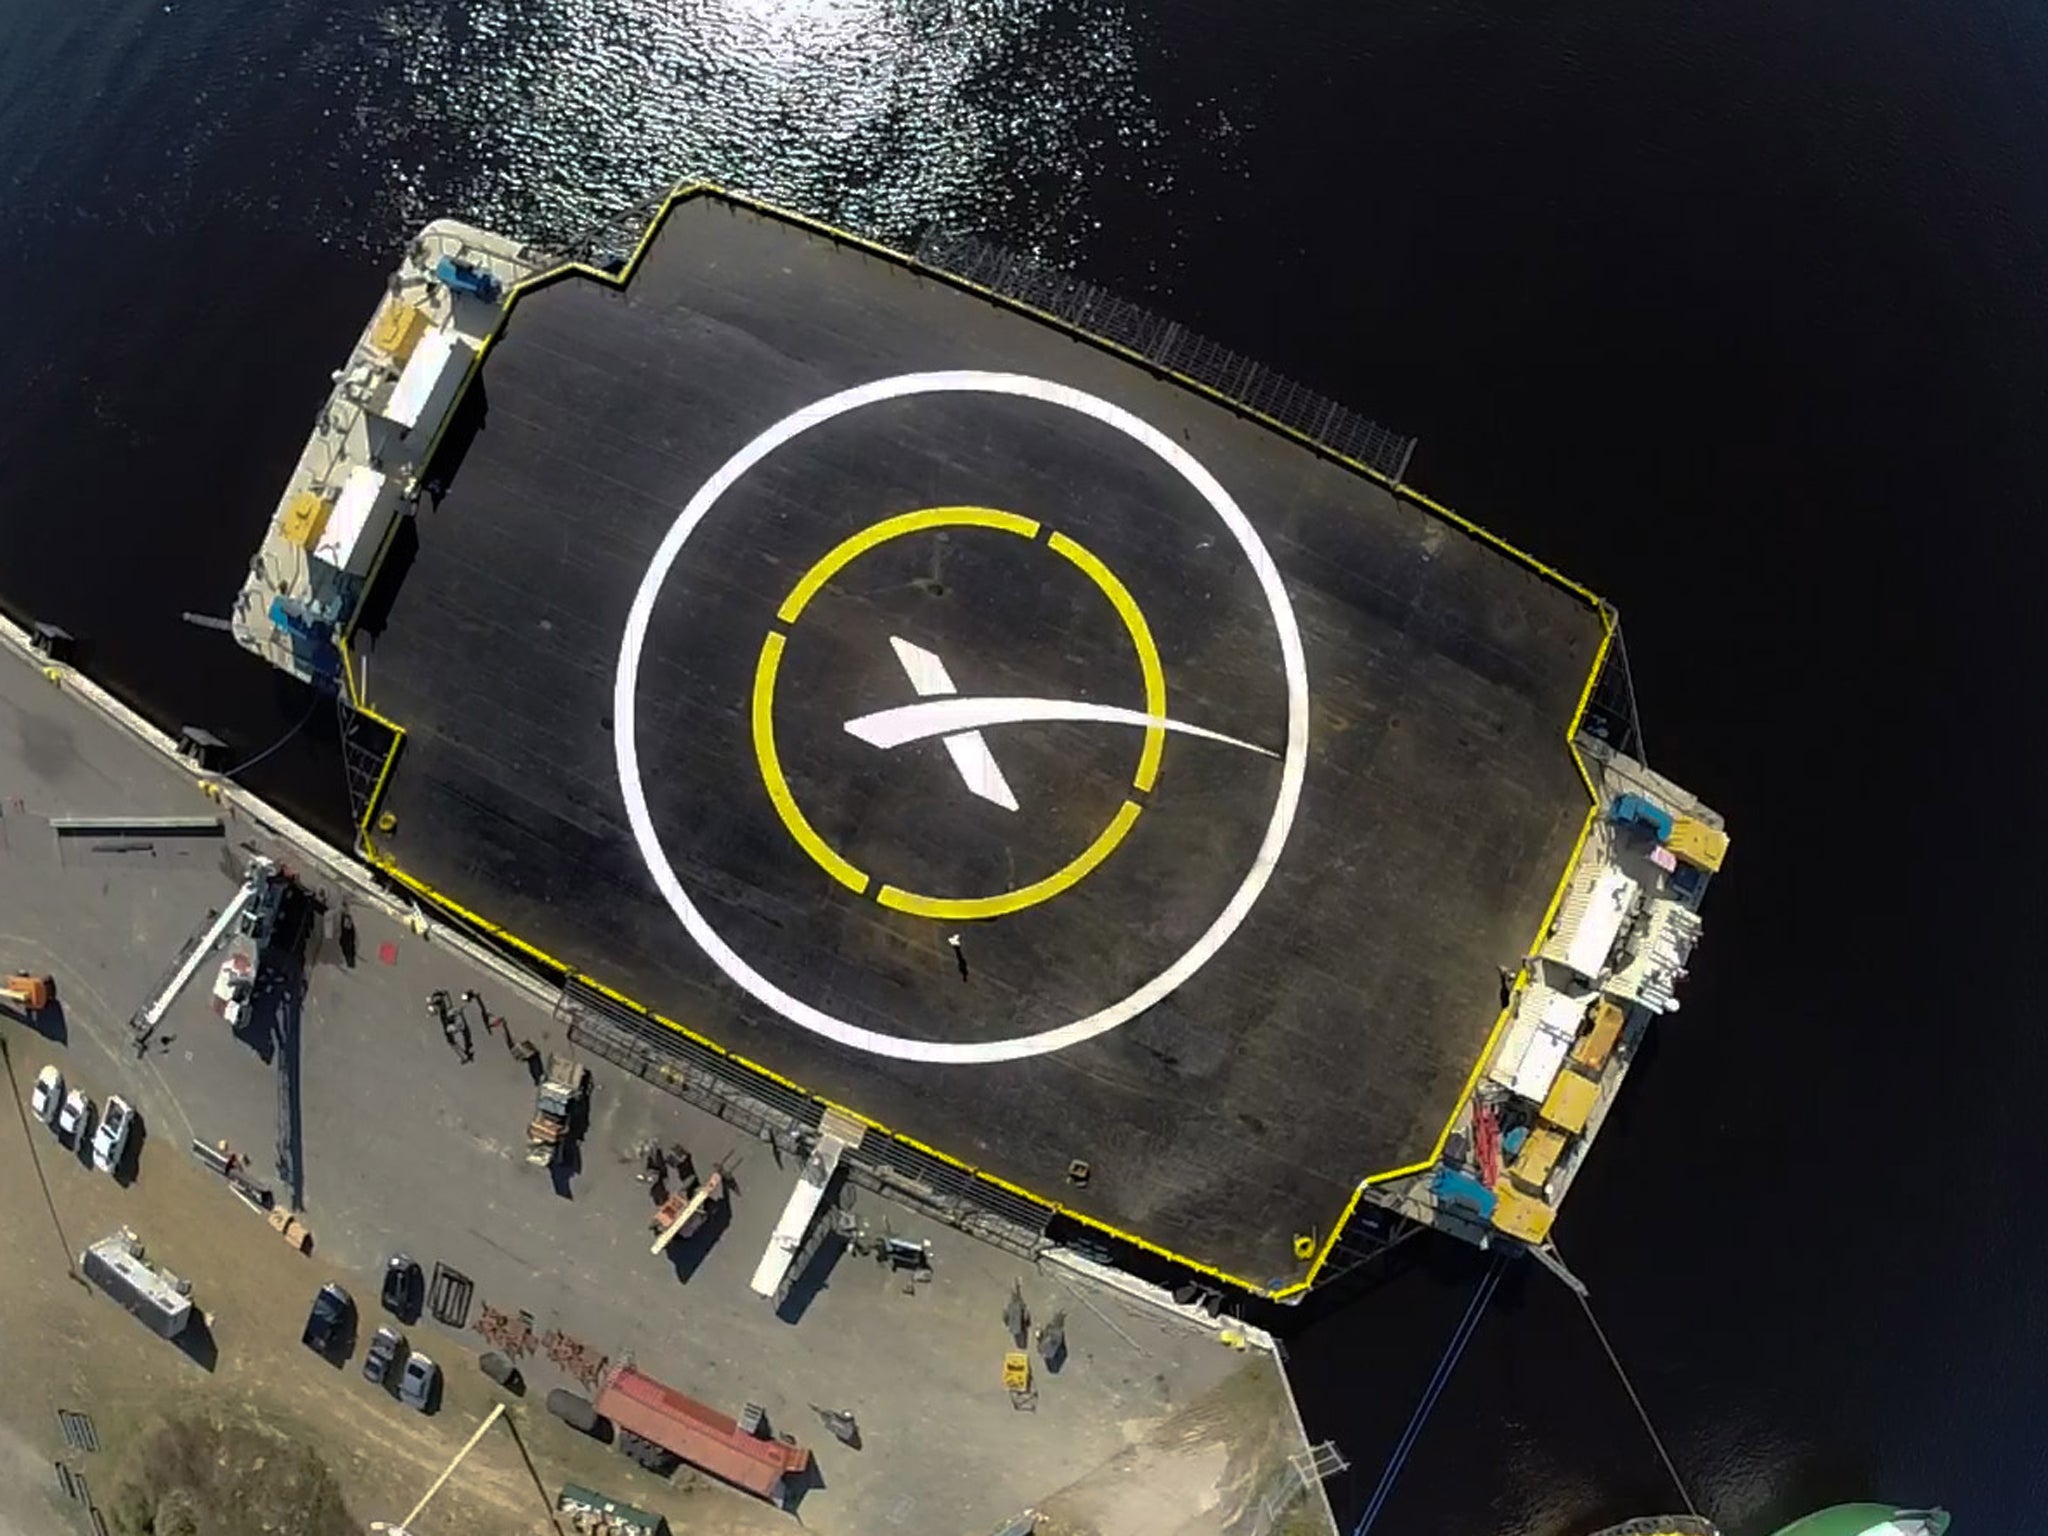 The barge looks big from close up, but tiny when you're trying to land a rocket on it, SpaceX has said